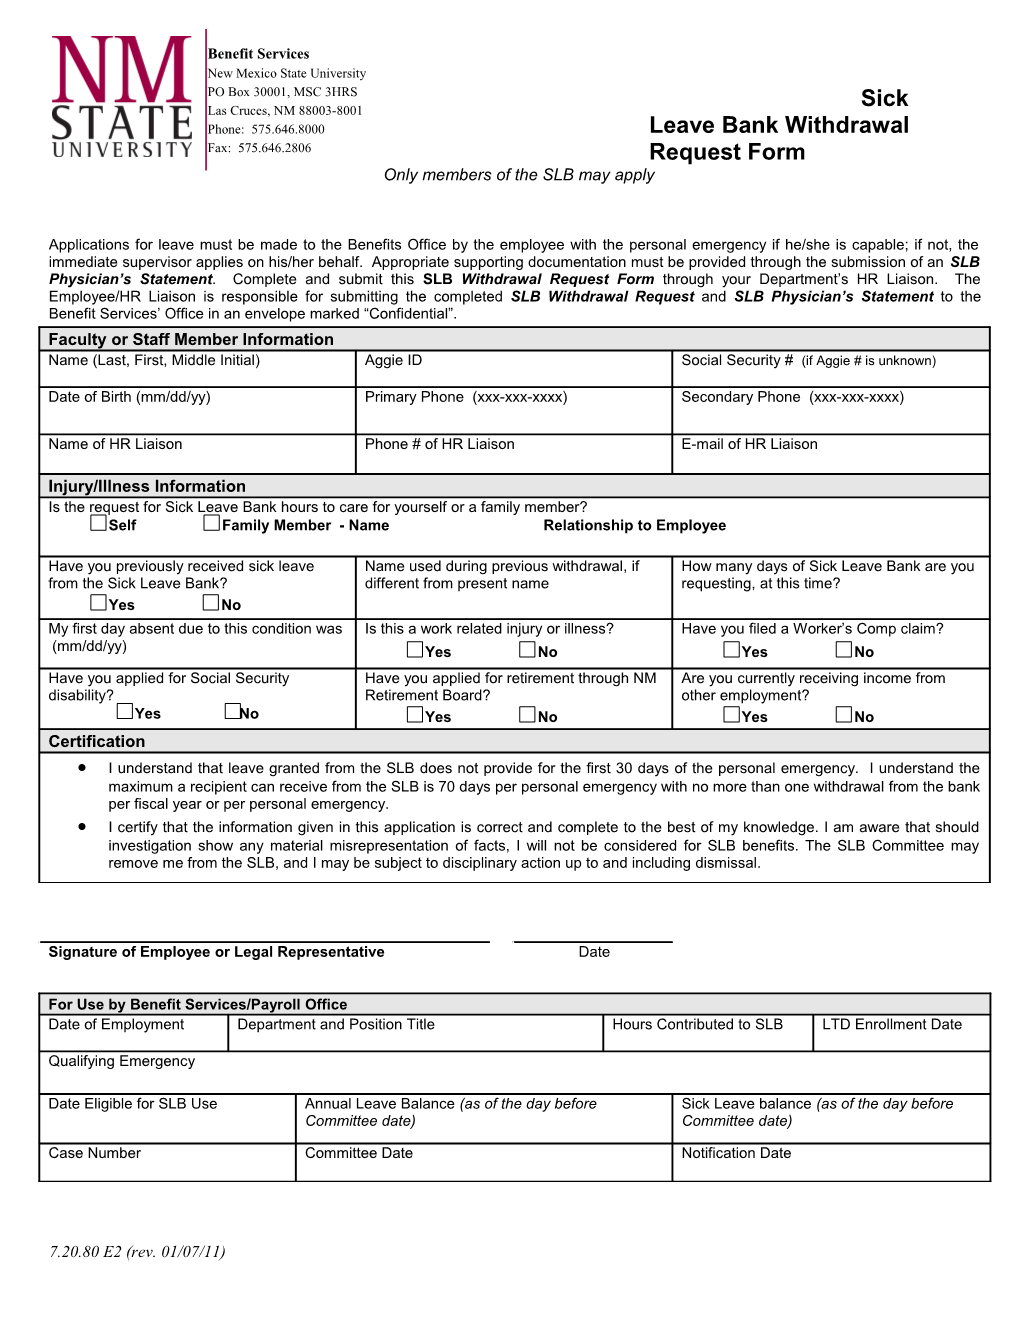 Sick Leave Bank Withdrawal Request Form